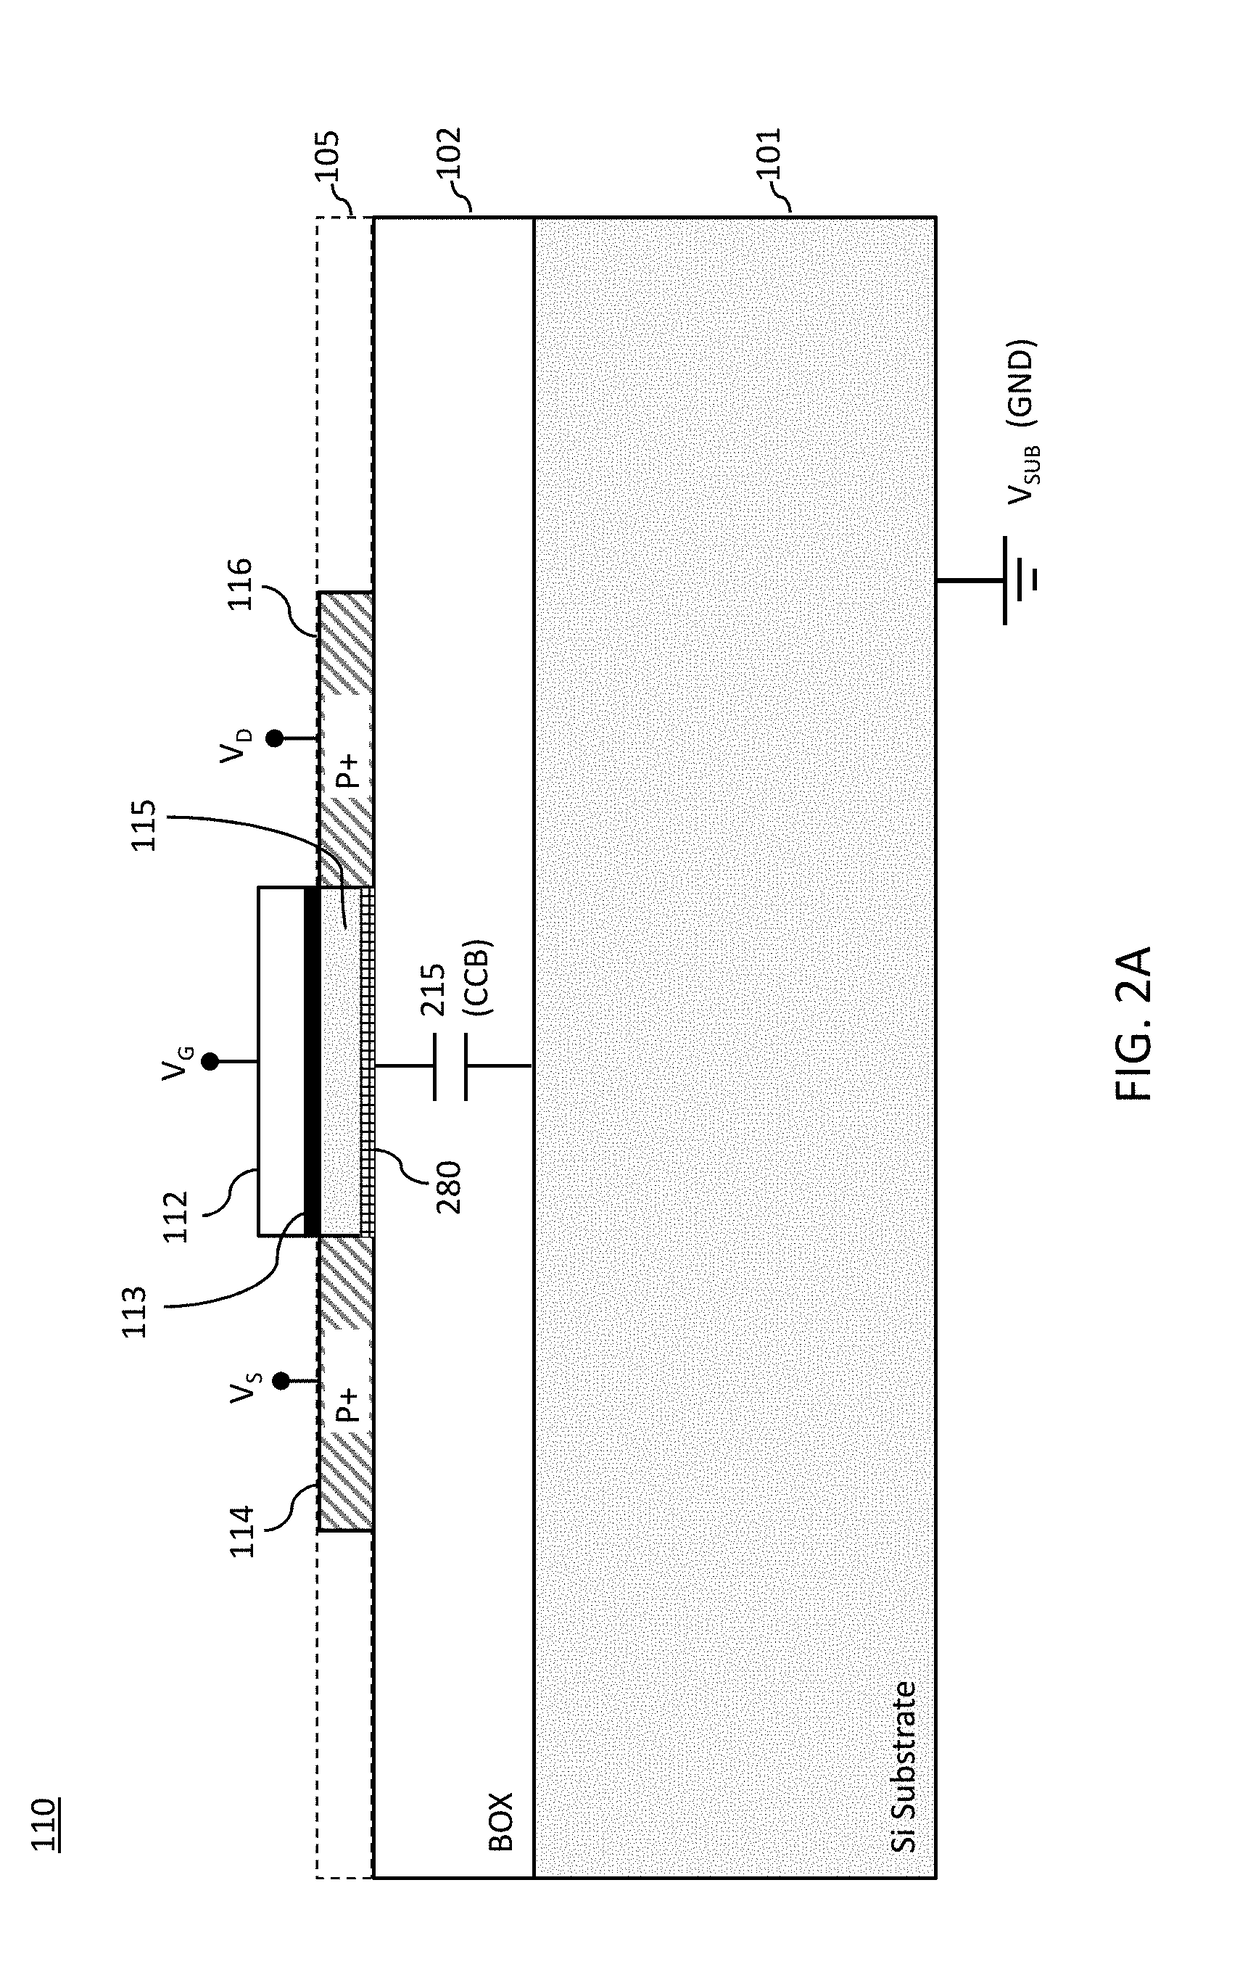 Systems, Methods and Apparatus for Enabling High Voltage Circuits